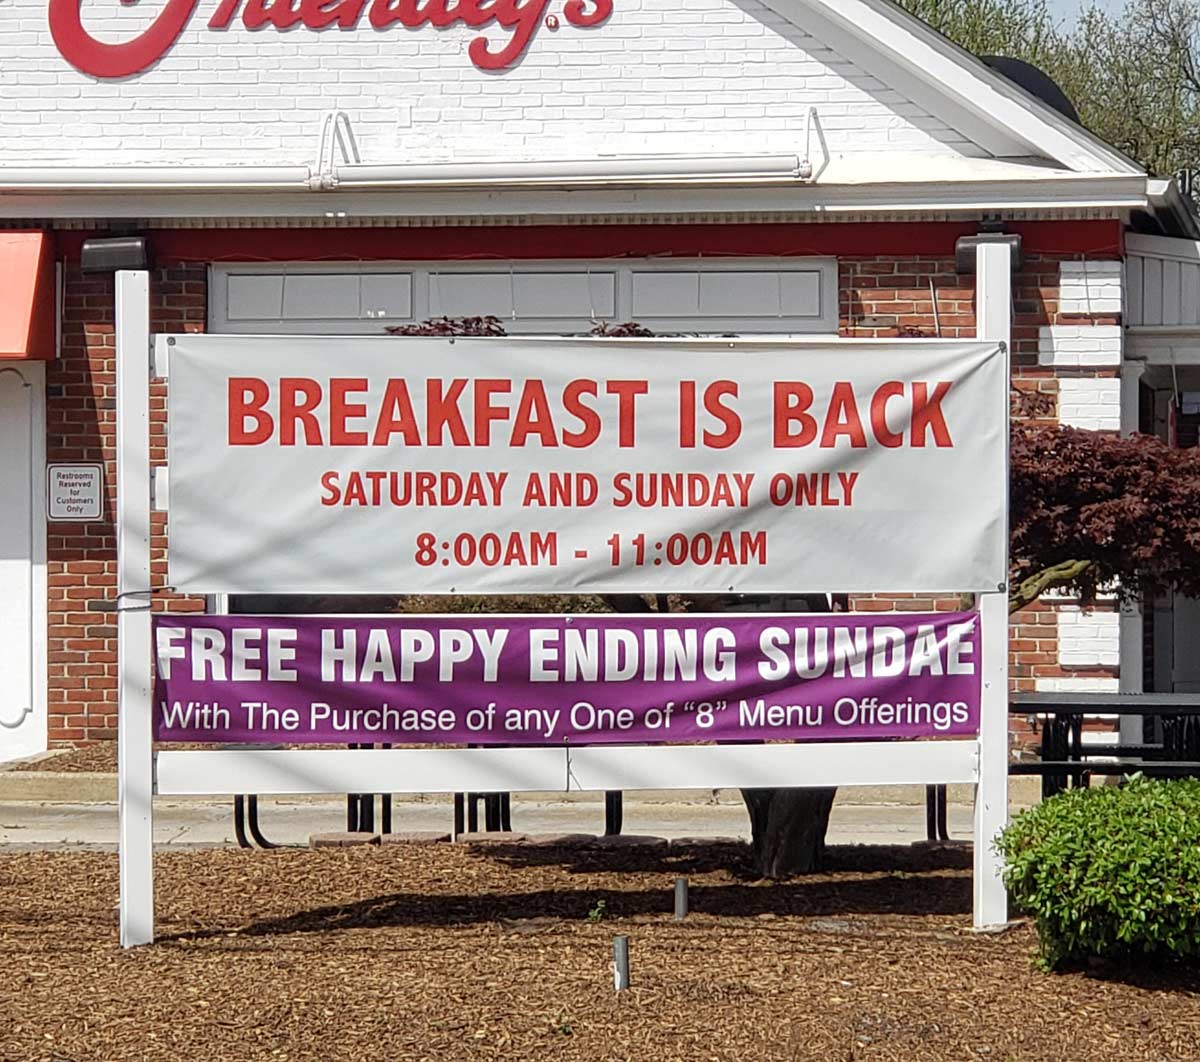 My local Friendly's looks to be getting desperate, or too Friendly